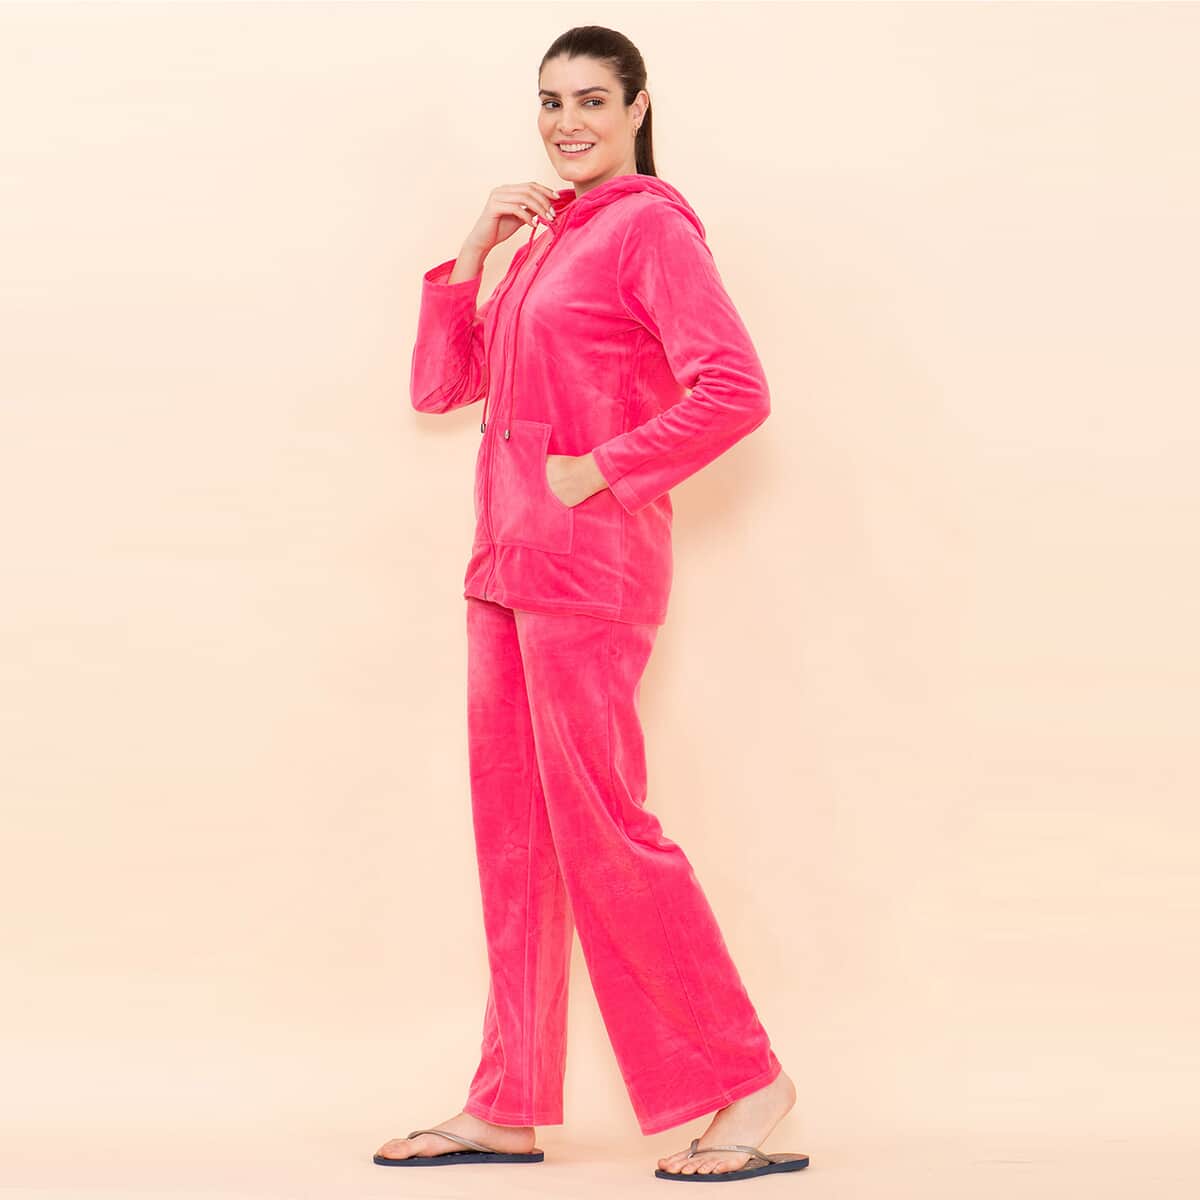 Tamsy LUX Pink Velour Track Suit Set - 3X image number 5